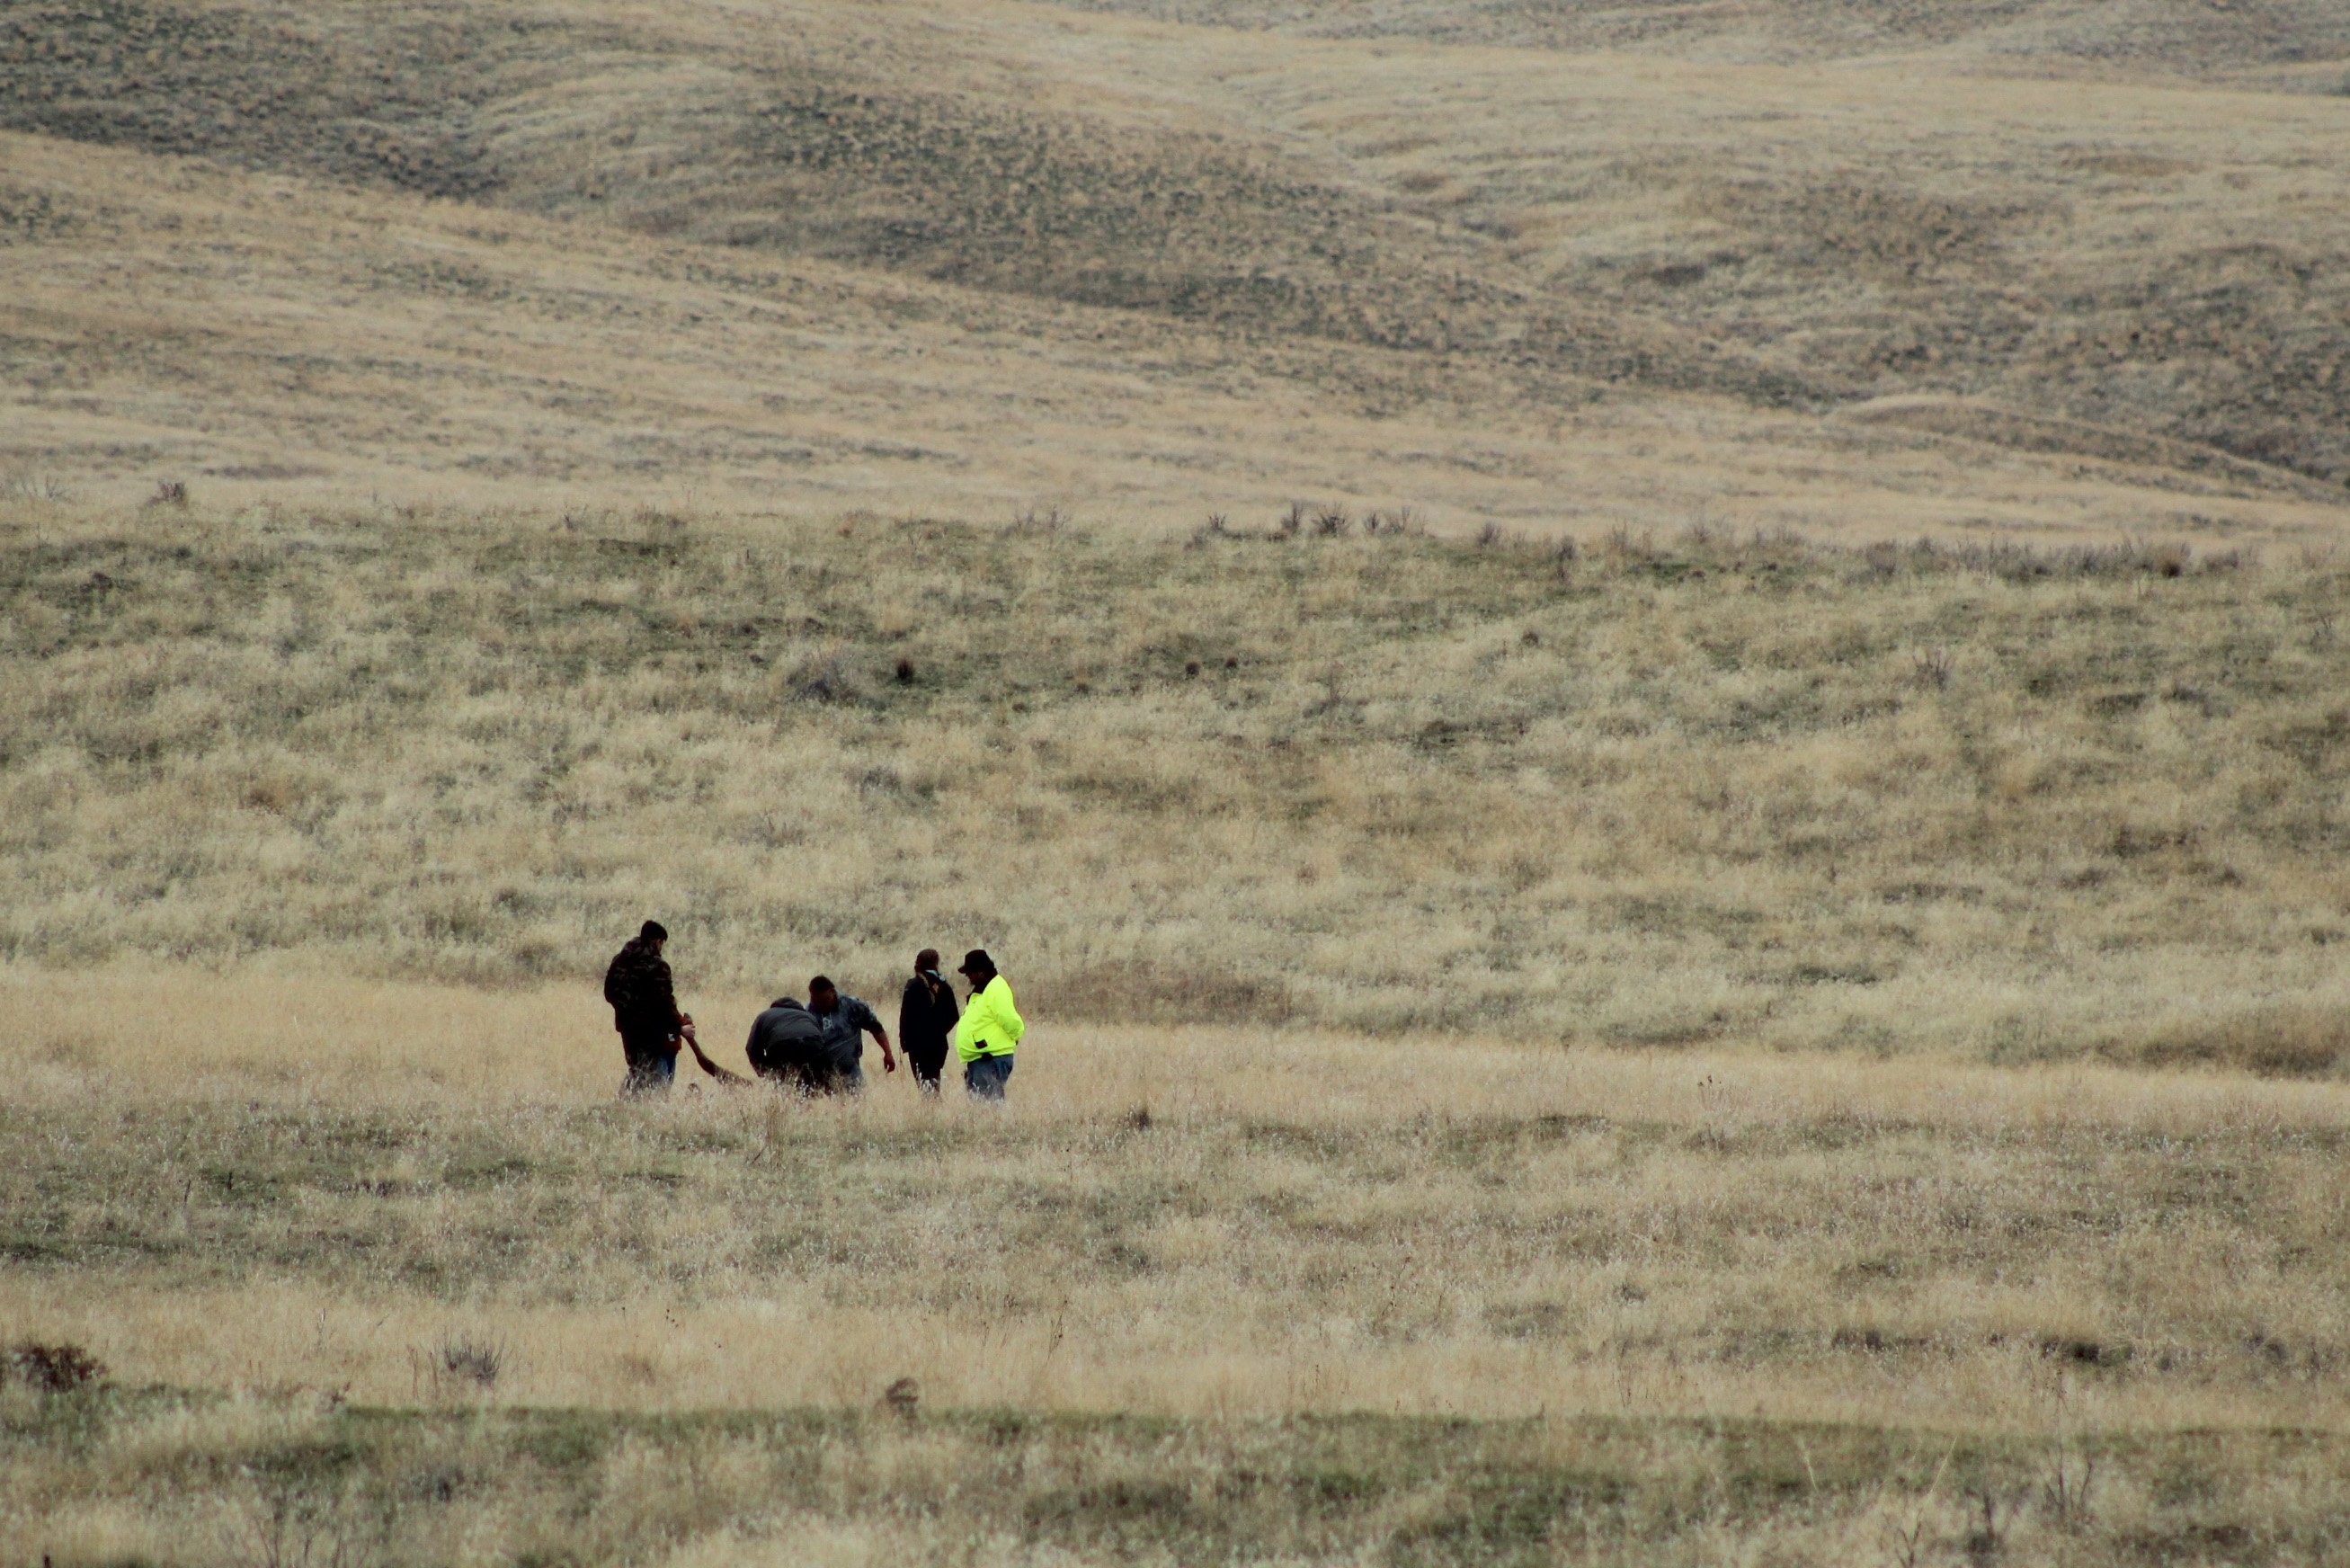 Hunters work quickly on the Hanford Reach National Monument near Richland, Washington after the elk kill to cool and pack out the meat.